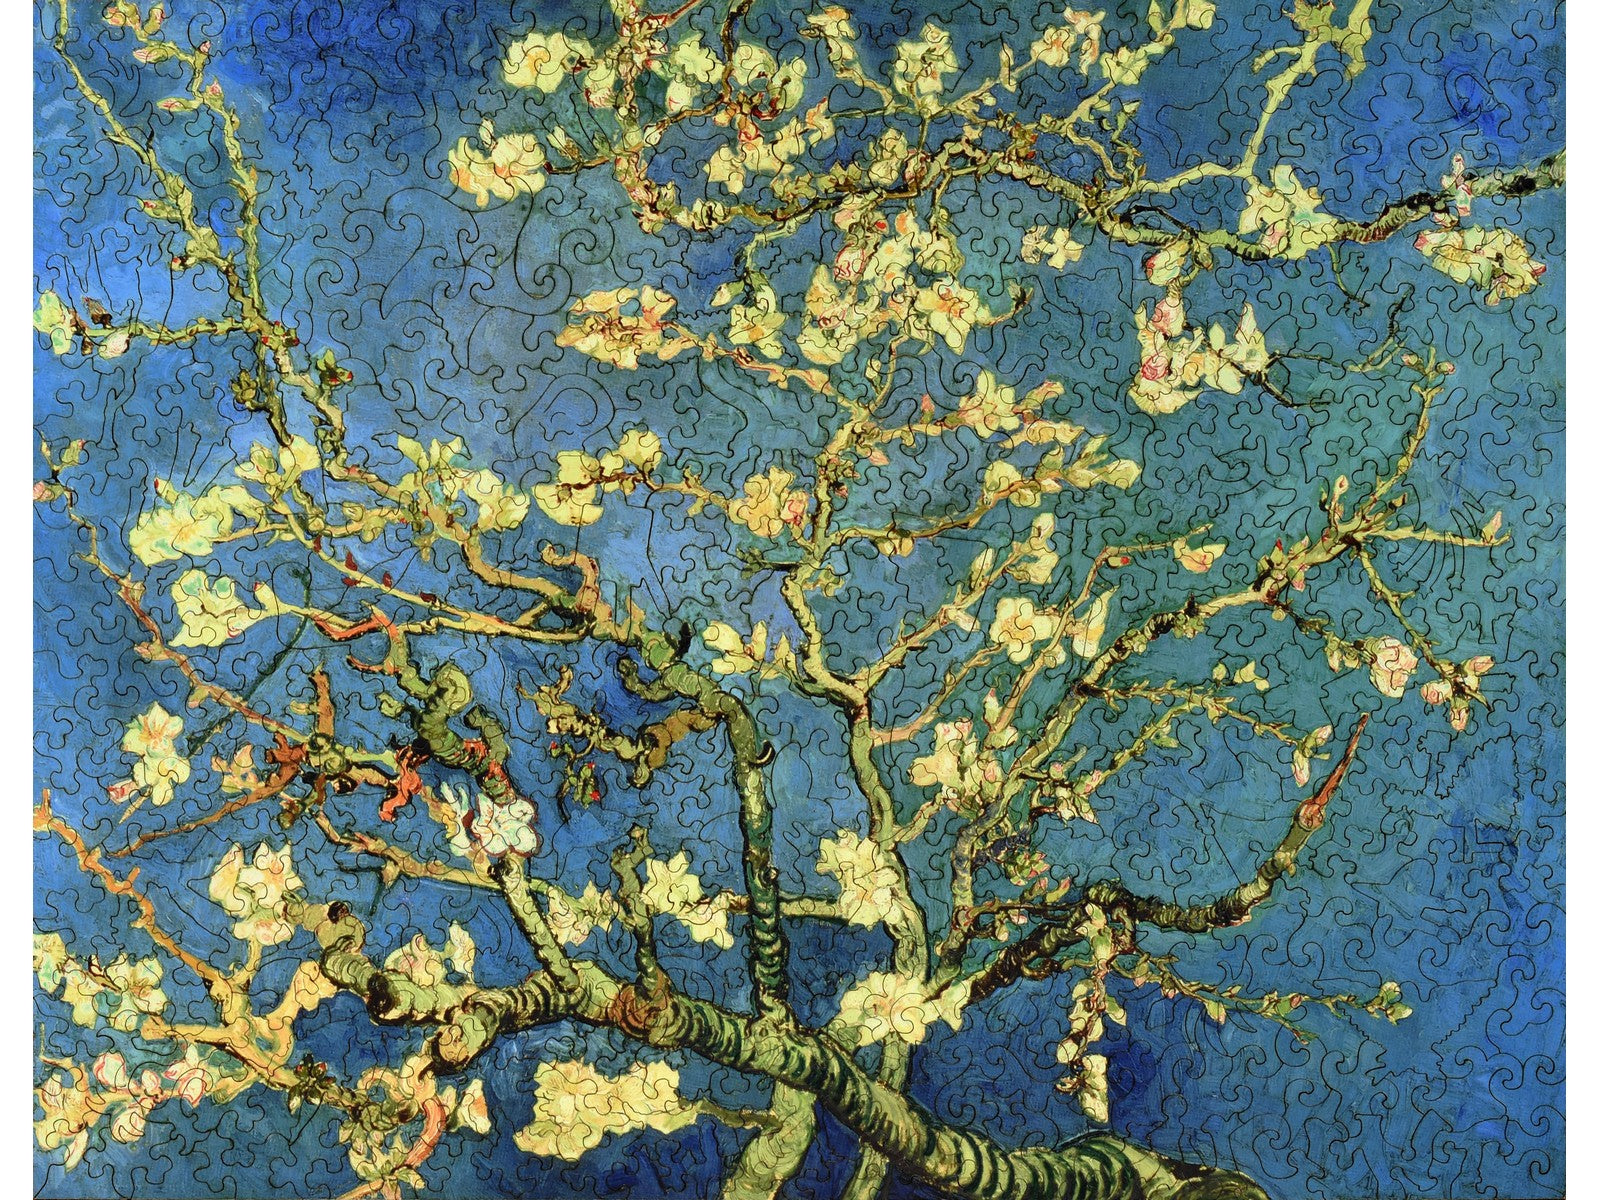 The front of the puzzle, Almond Blossom, which shows a blossoming branch on a blue background.